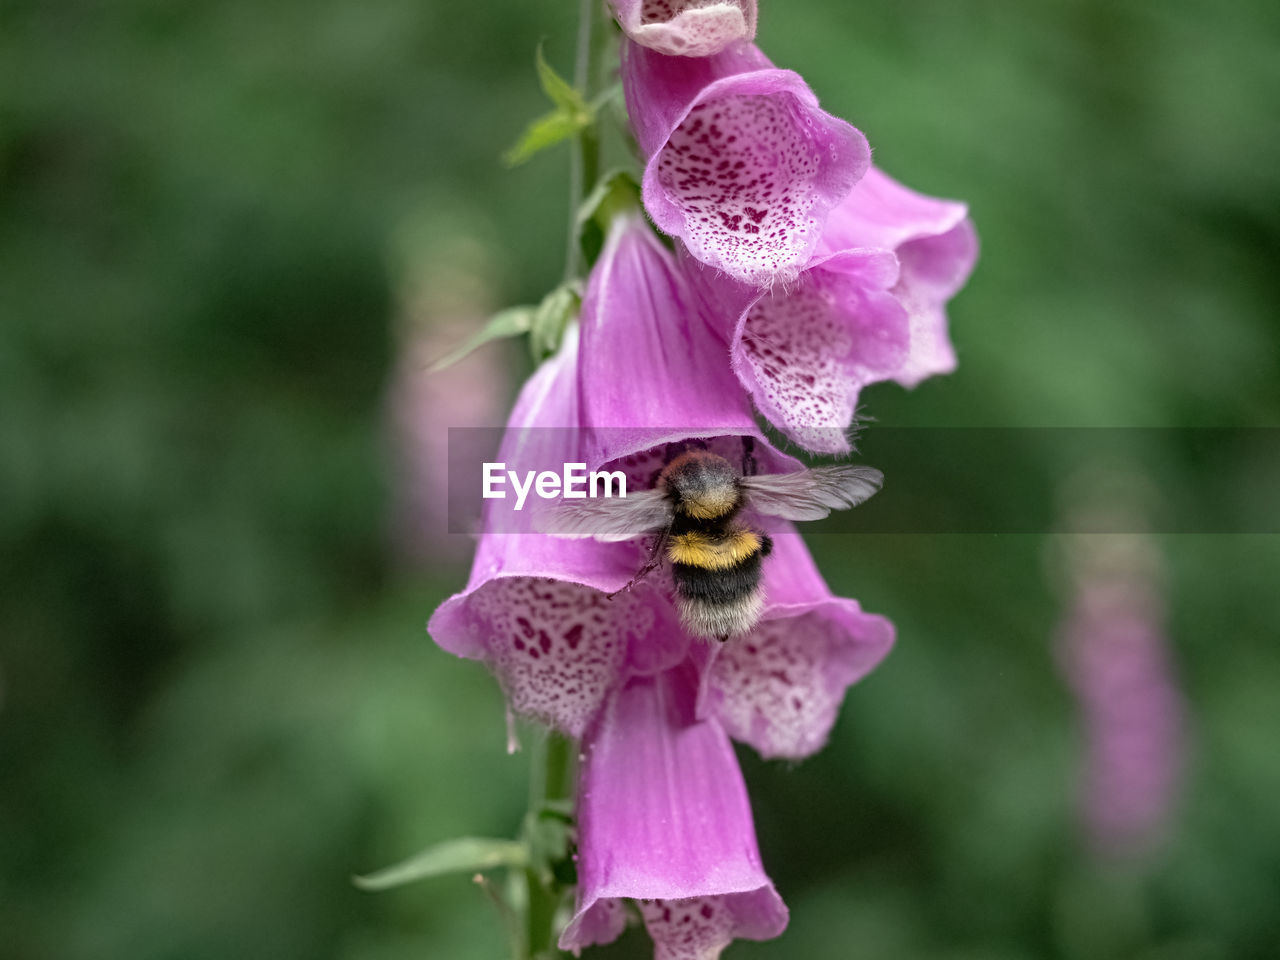 flower, flowering plant, plant, beauty in nature, pink, freshness, purple, digitalis, fragility, flower head, close-up, petal, nature, animal, animal themes, focus on foreground, animal wildlife, growth, inflorescence, macro photography, wildflower, one animal, insect, no people, wildlife, outdoors, blossom, magenta, day, bee, pollination, springtime